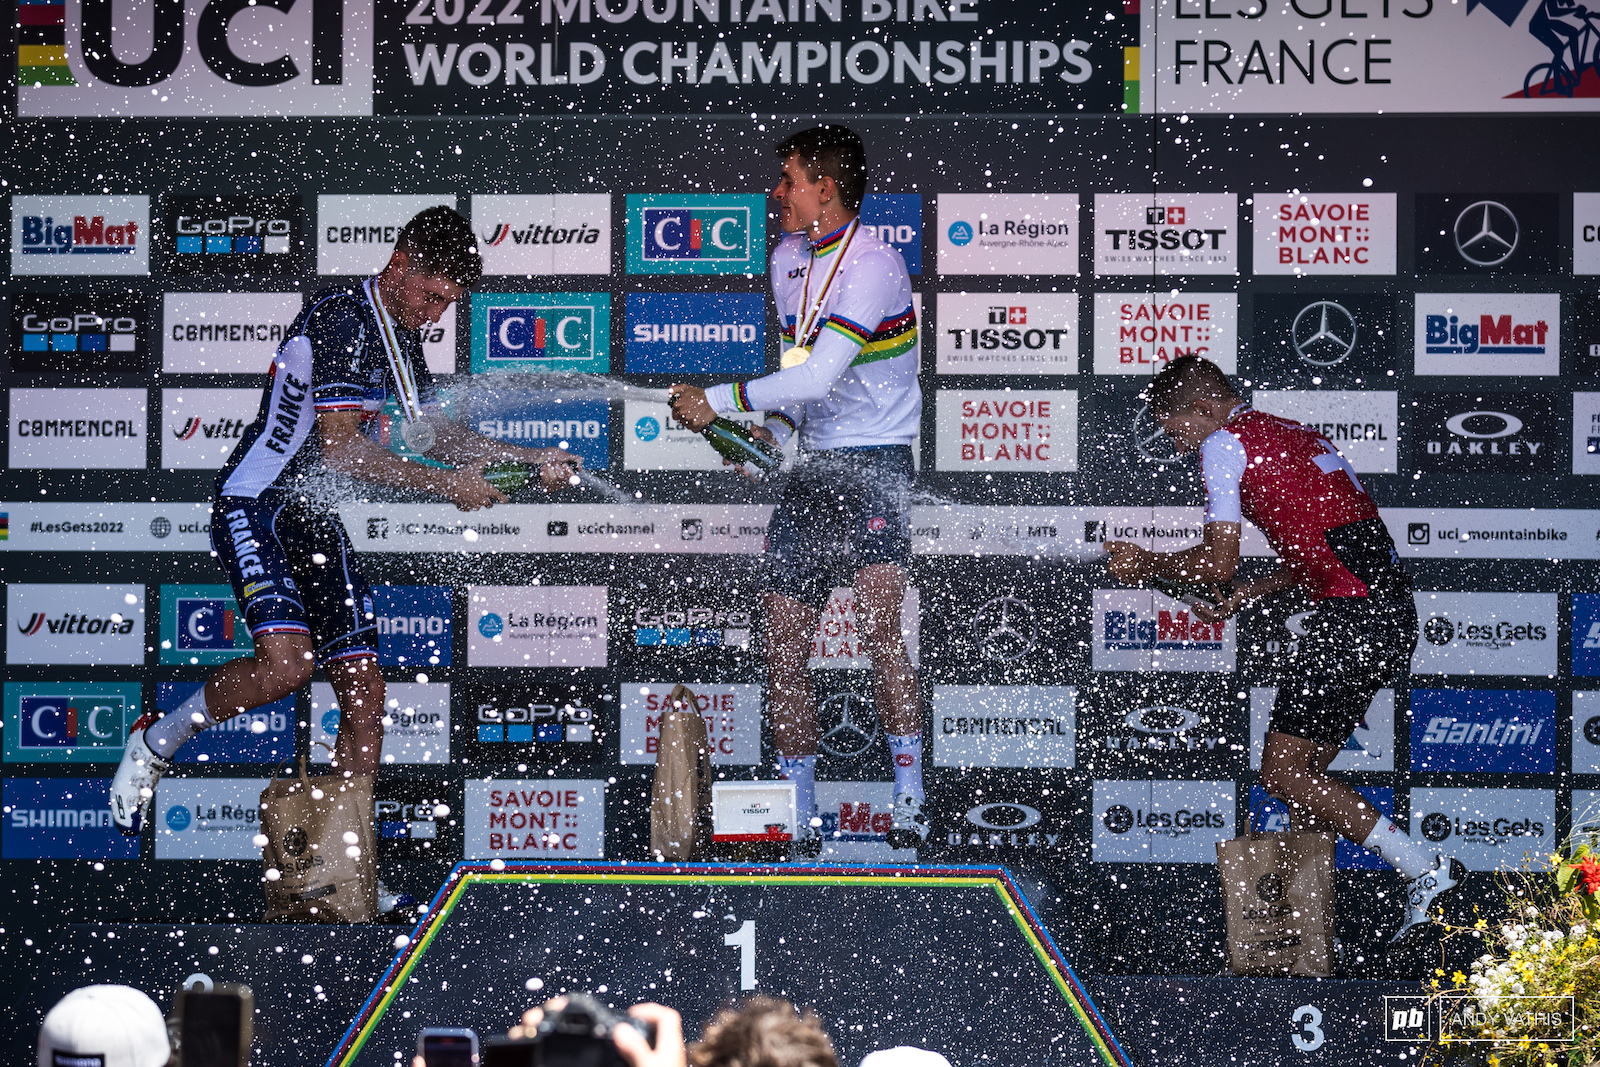 Champagne showers for the champs.